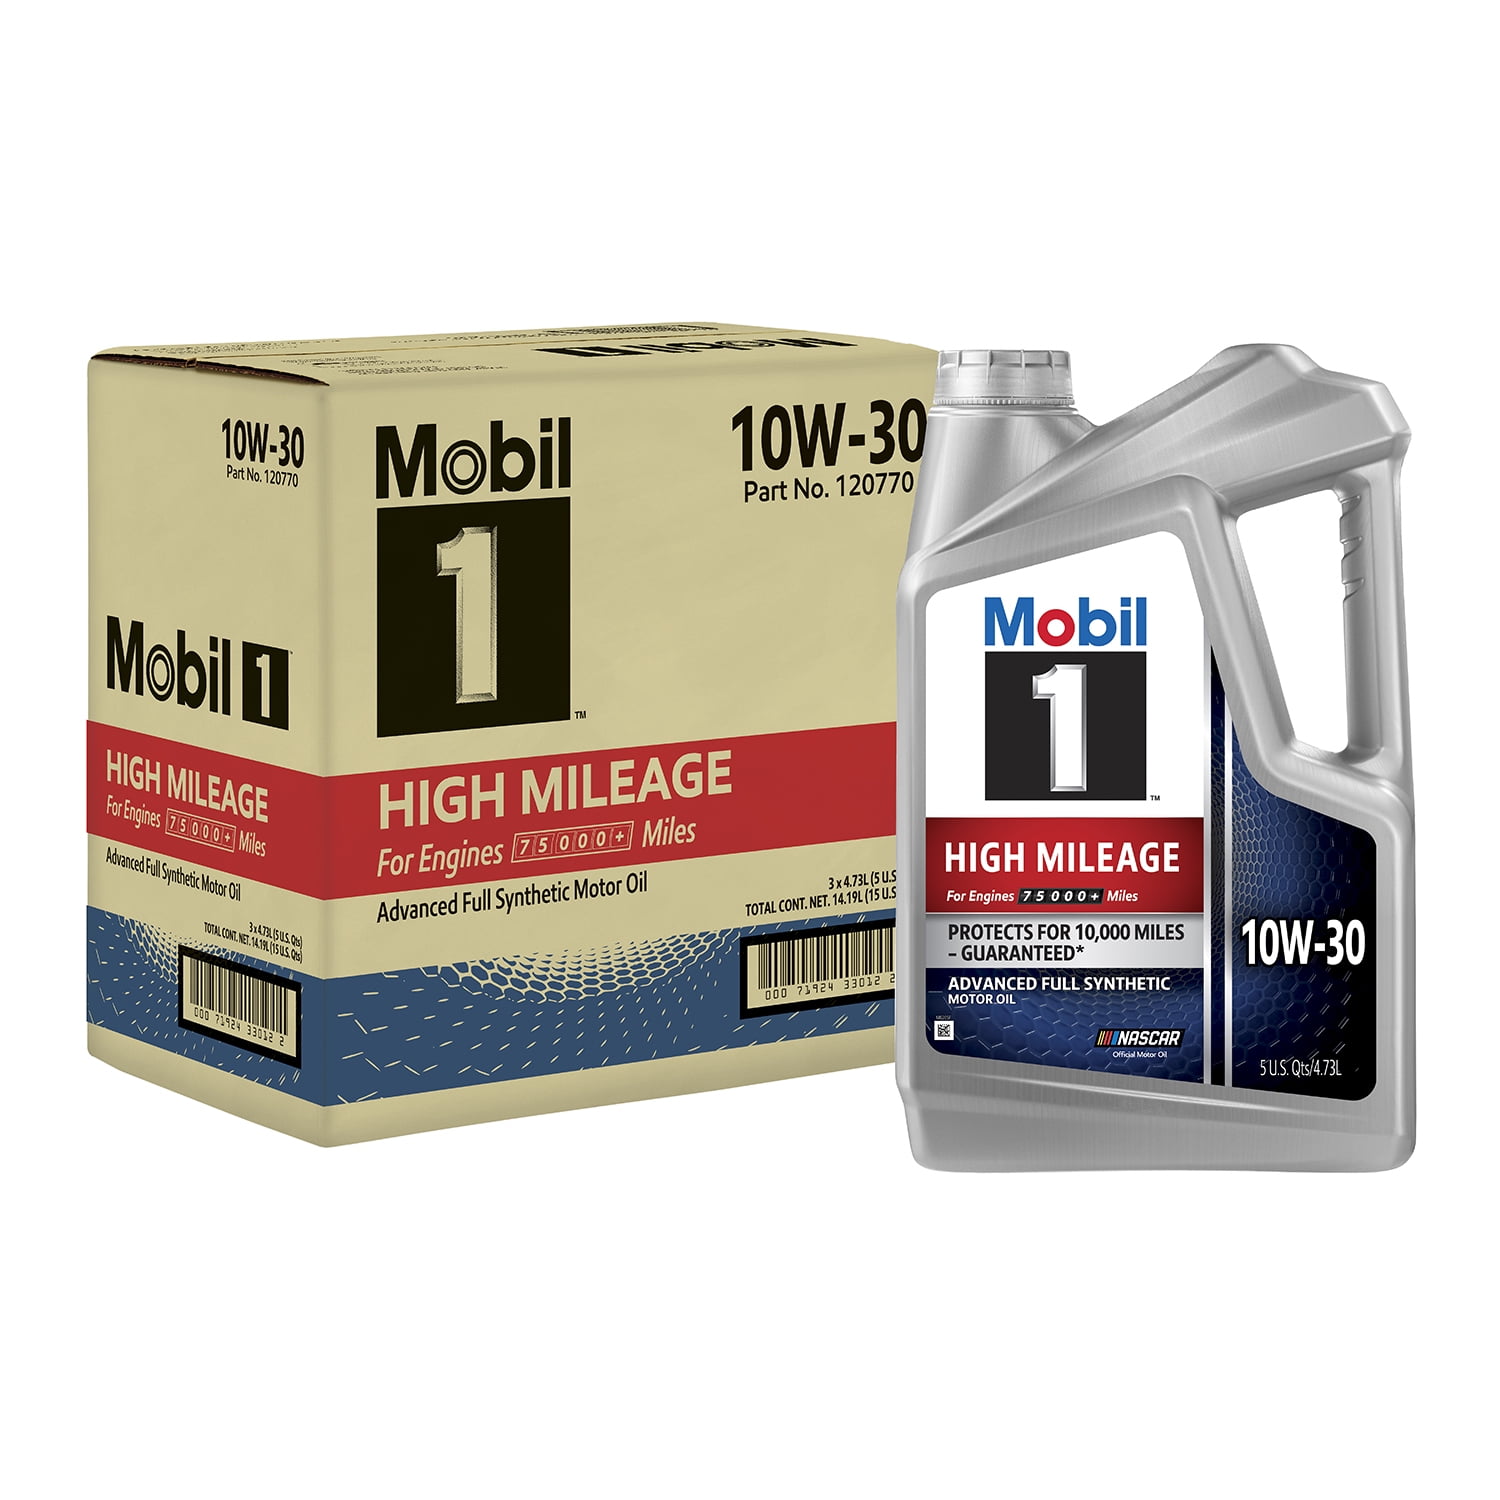 Mobil 1 High Mileage Full Synthetic Motor Oil 10W-30, 5 qt (3 Pack) - 1